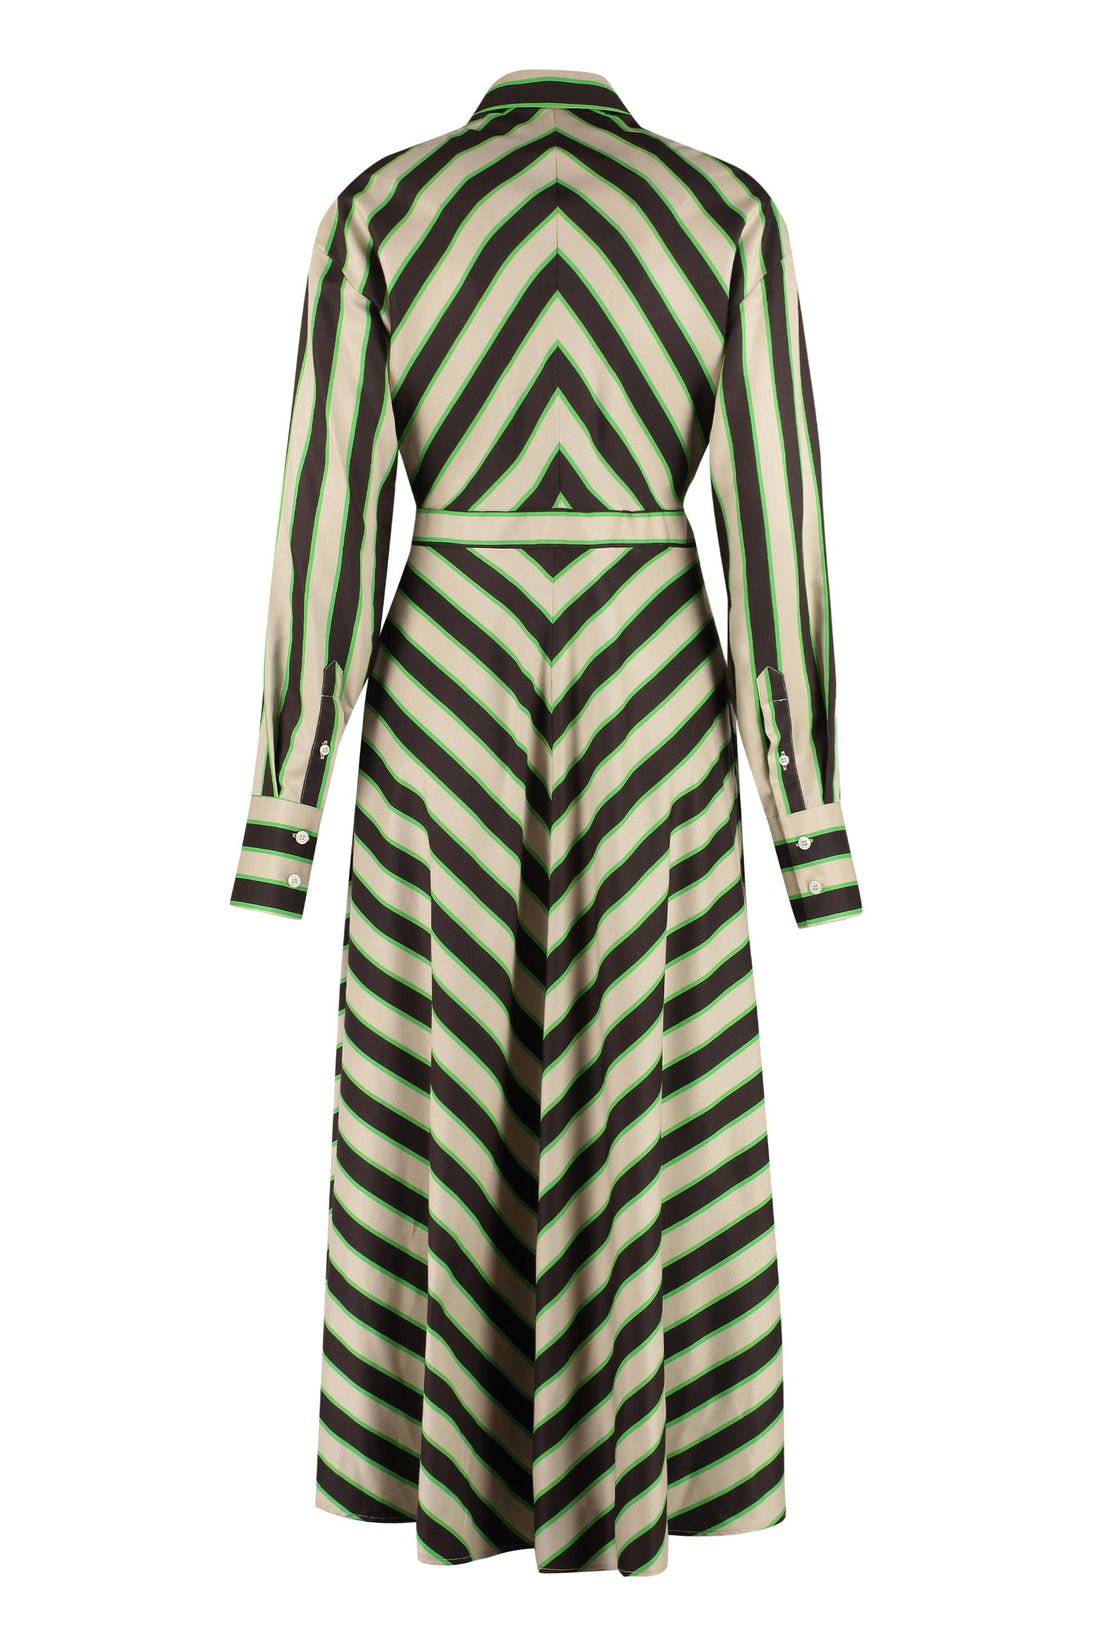 MSGM-OUTLET-SALE-Printed shirtdress-ARCHIVIST